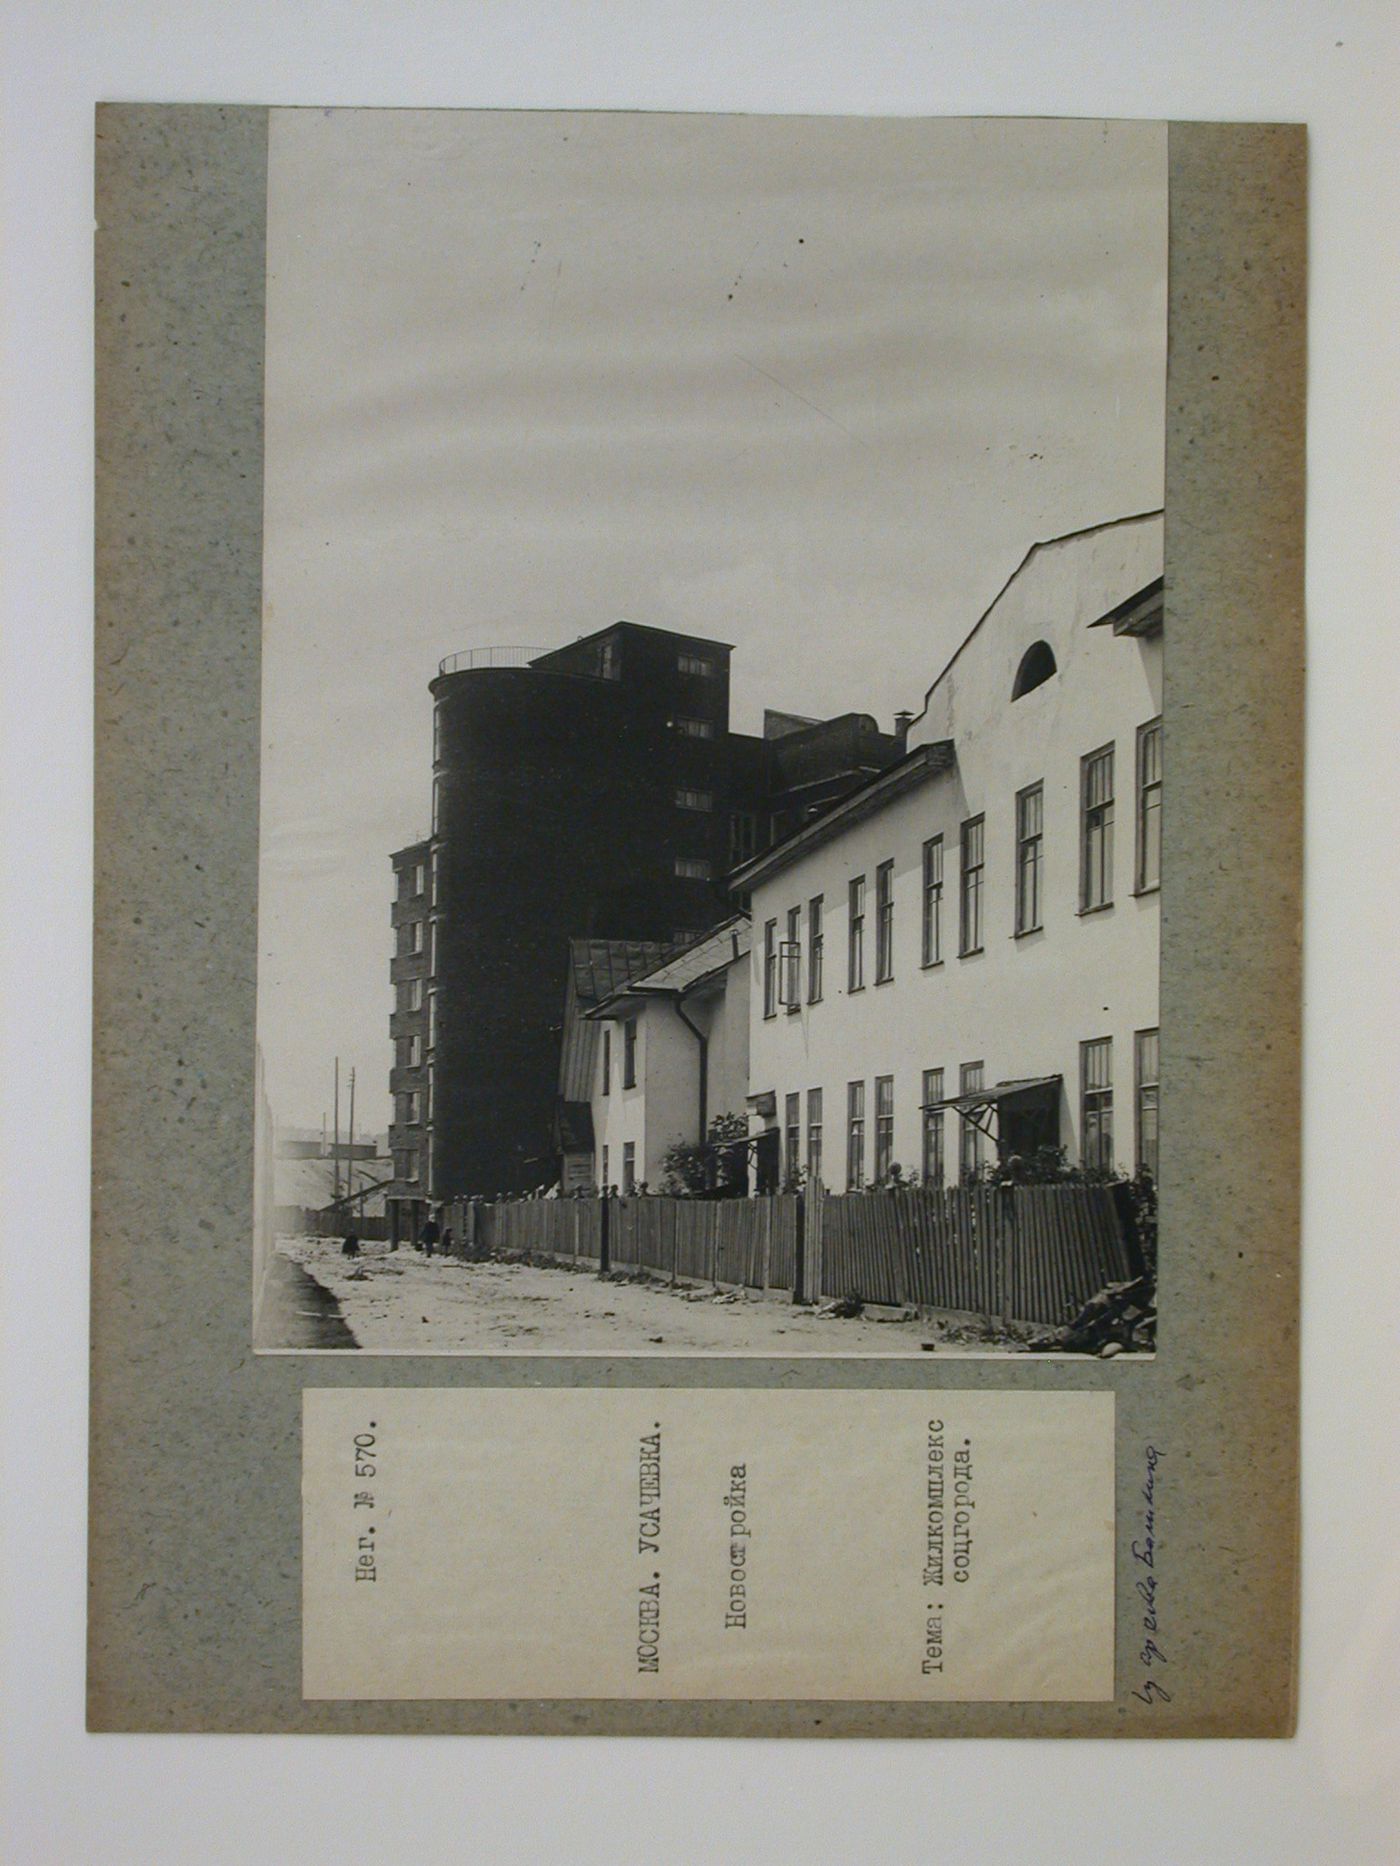 View of housing in the Usachevka complex, Moscow, Soviet Union (now in Russia)